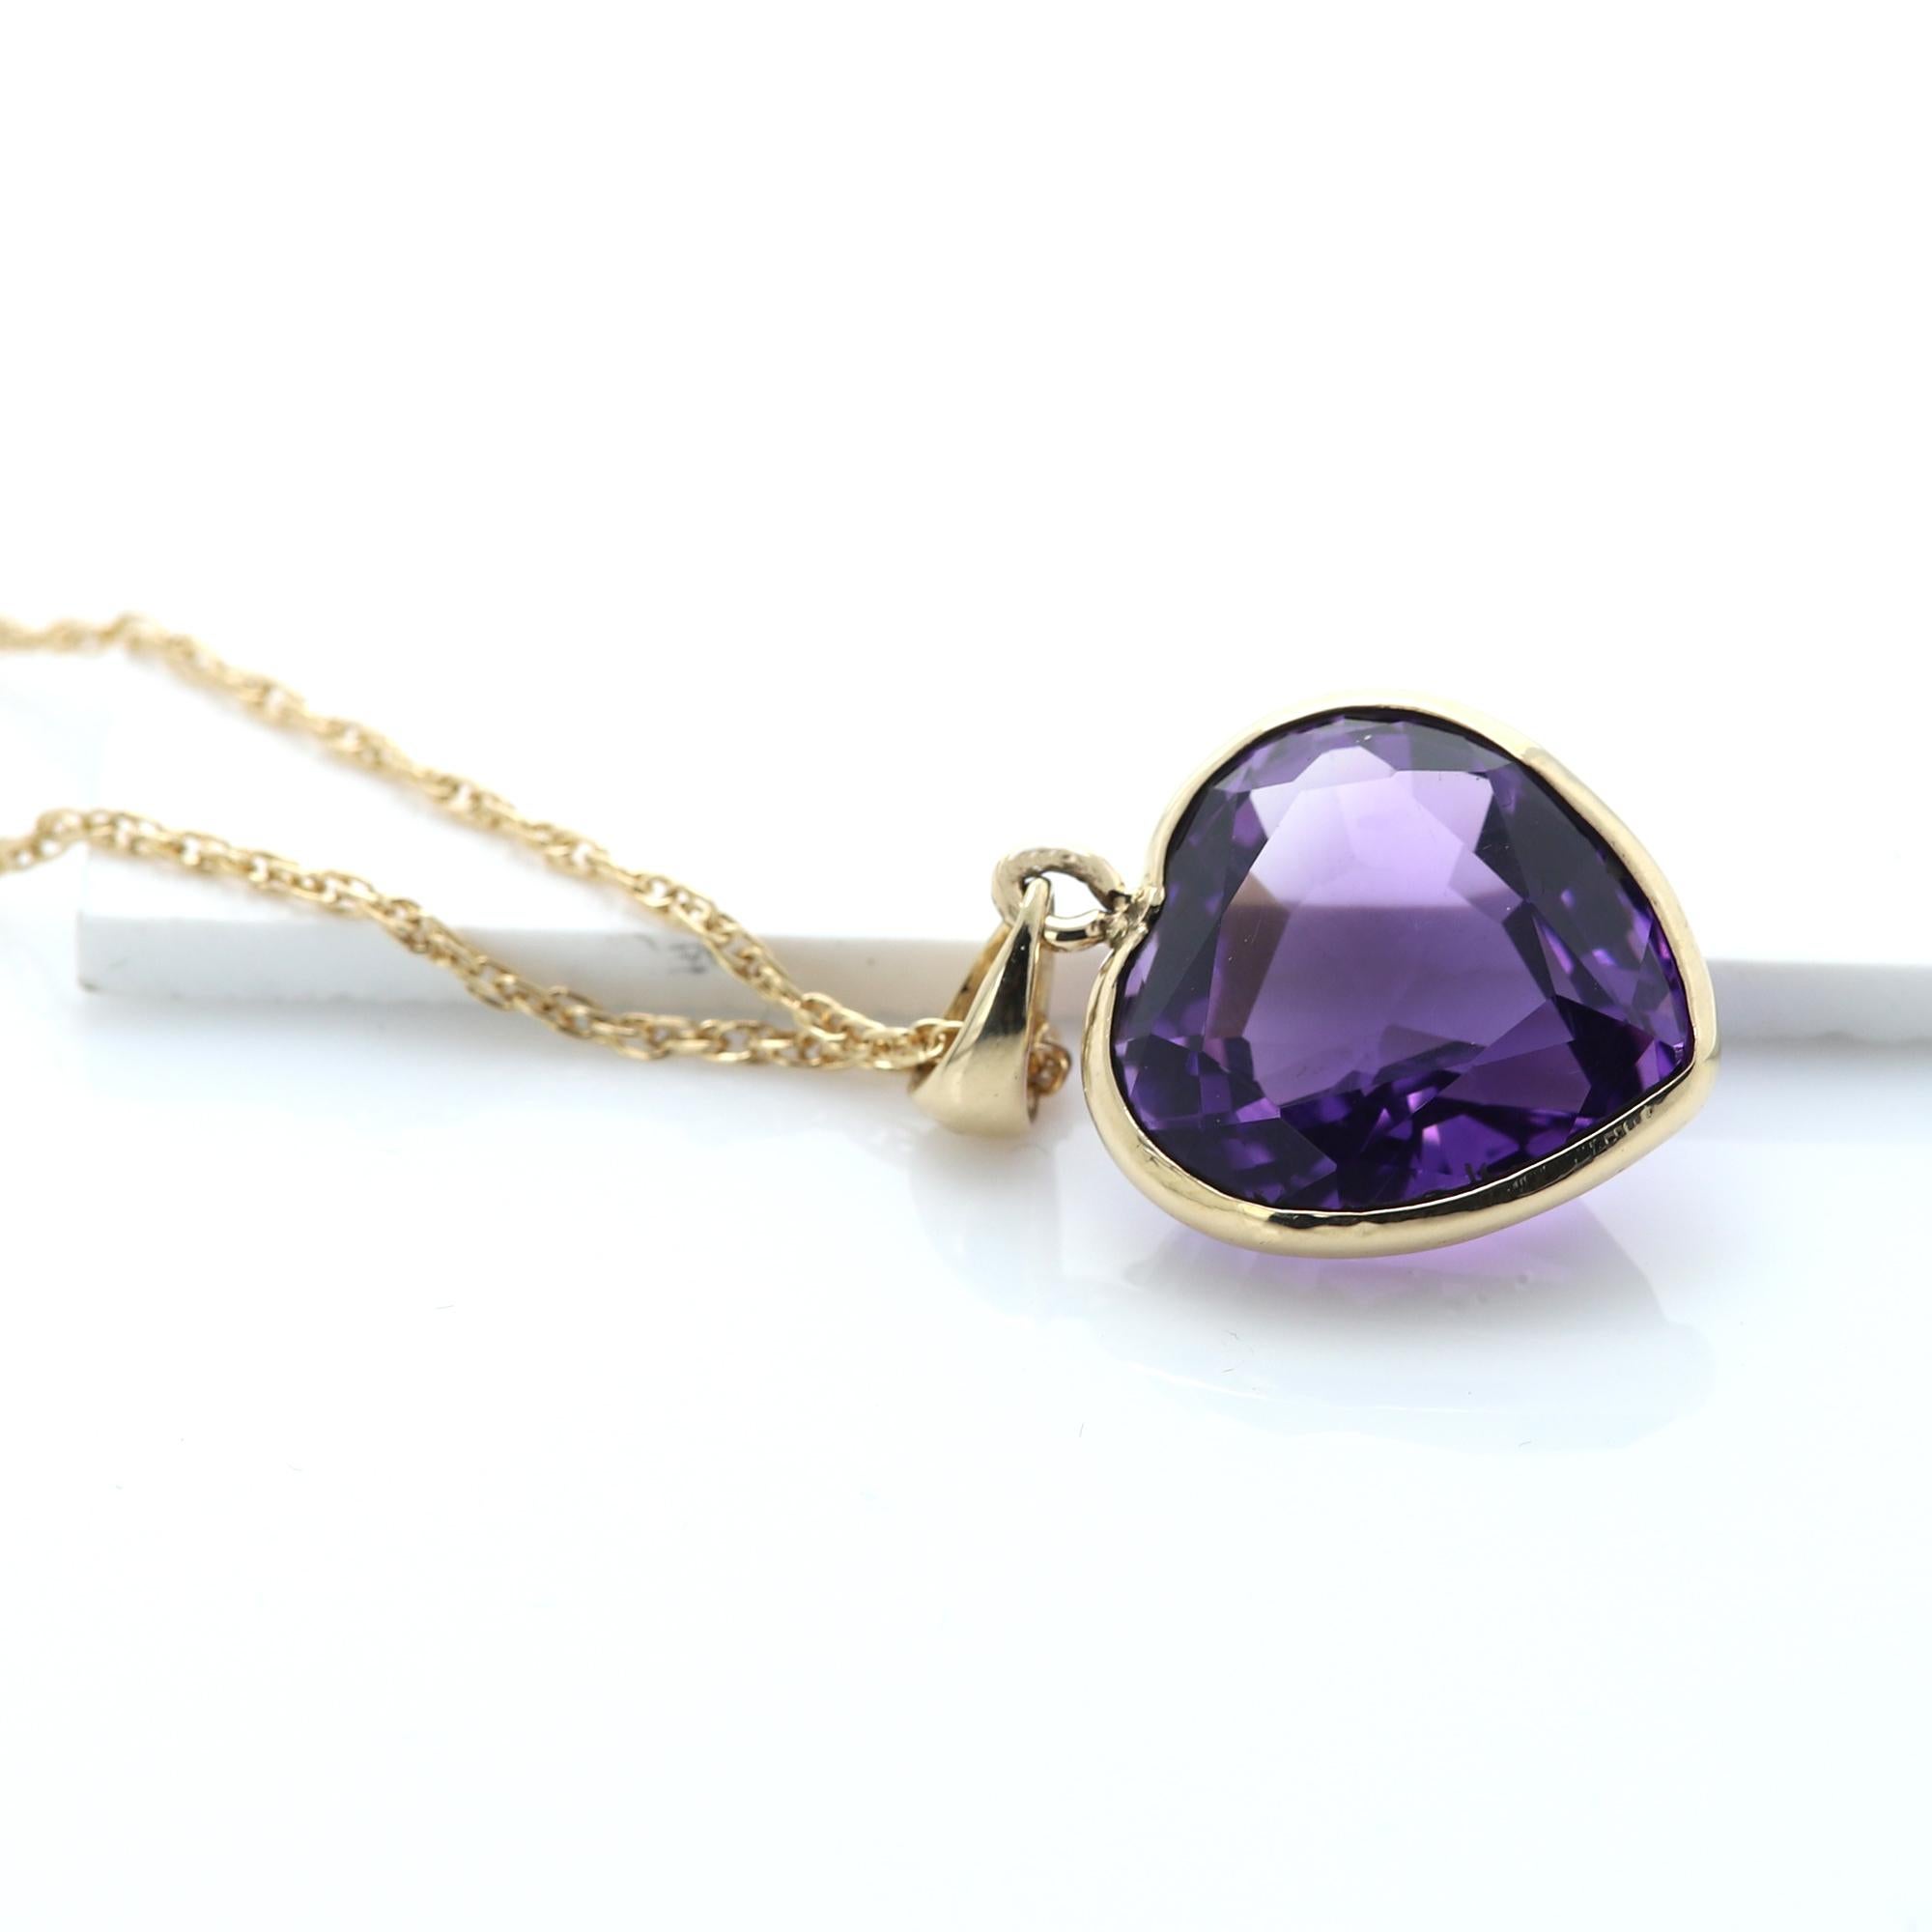 Large Purple Heart Pendant 13.60 carat
Deep Purple Amethyst Heart Shape Pendant
Natural Amethyst Gemstone
Bezel set in 14k yellow gold total weight 3.6 grams (without the chain)
Amethyst is 13.60 carat - Nice Brilliant Rich purple tone Color.
Size: